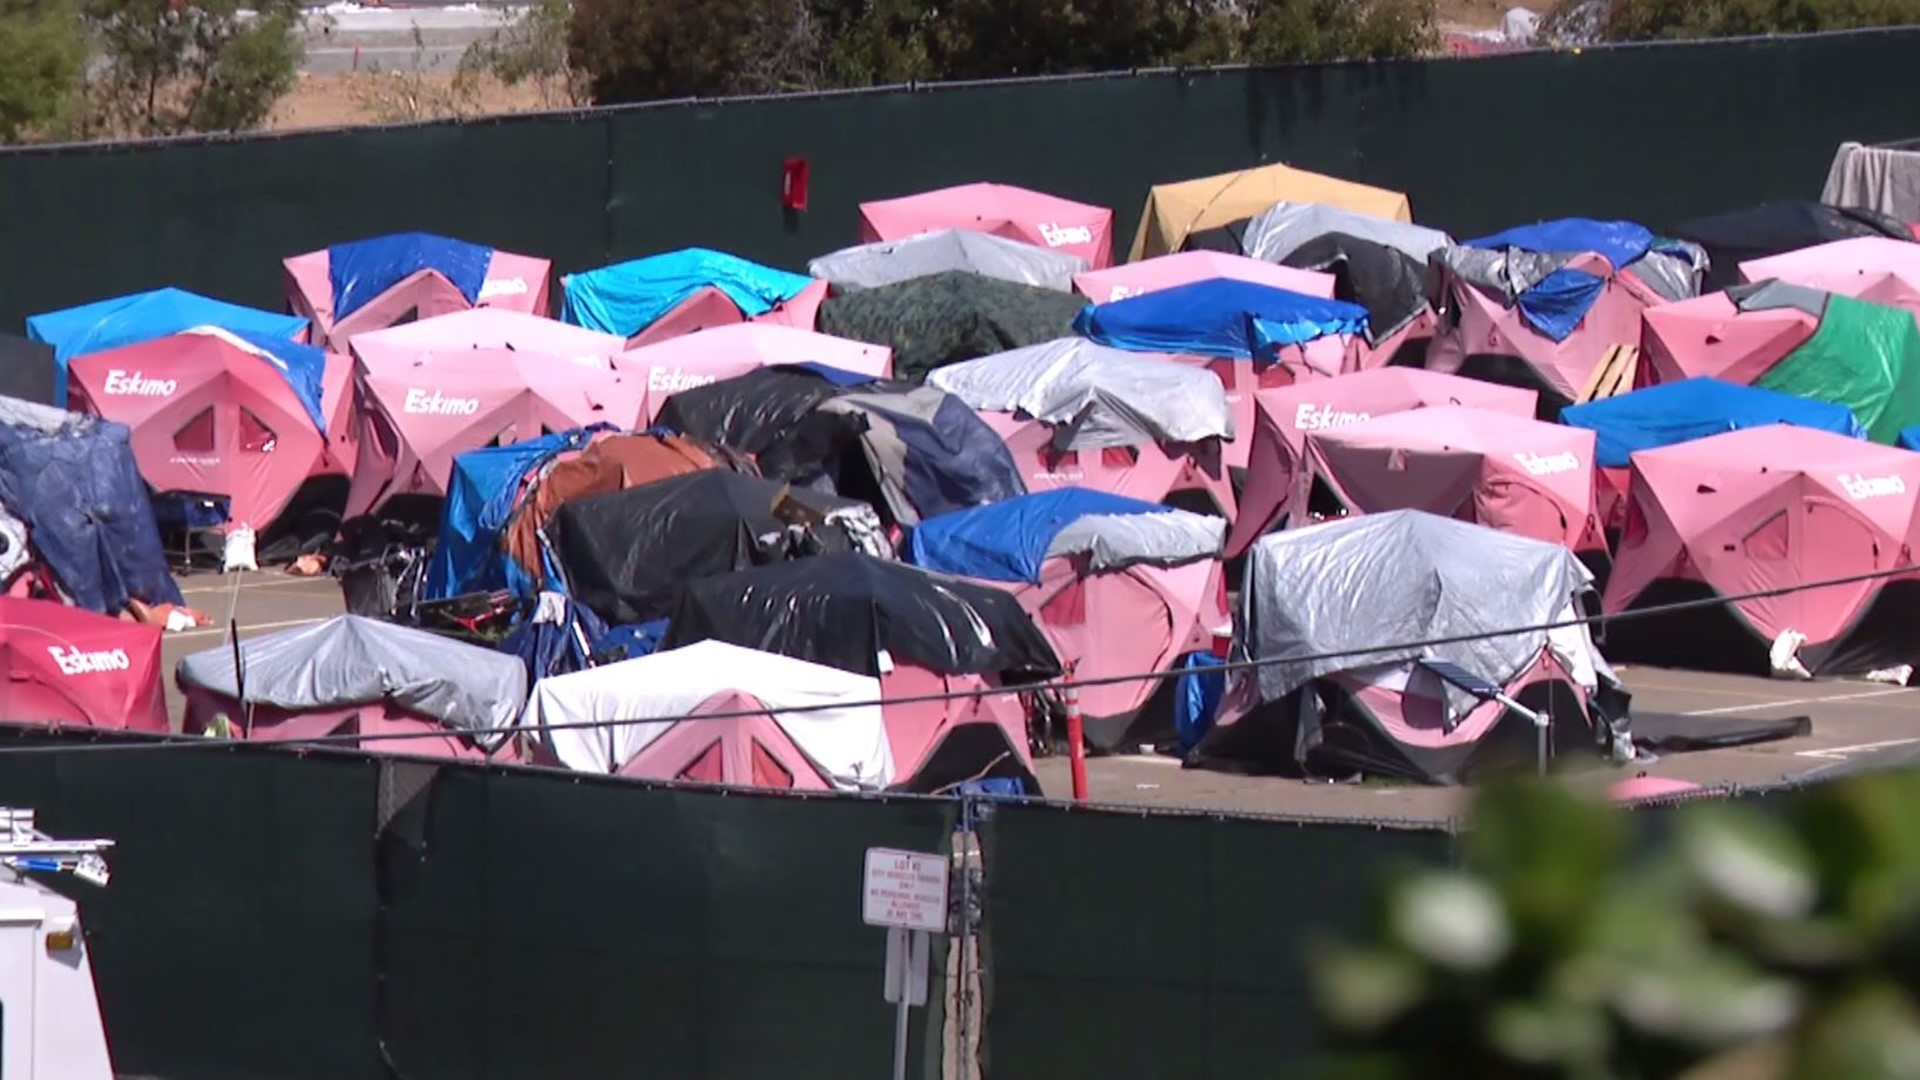 458 people are currently staying at both safe sleeping sites, while the city has connected 28 people to long-term housing since the sites were opened last year.